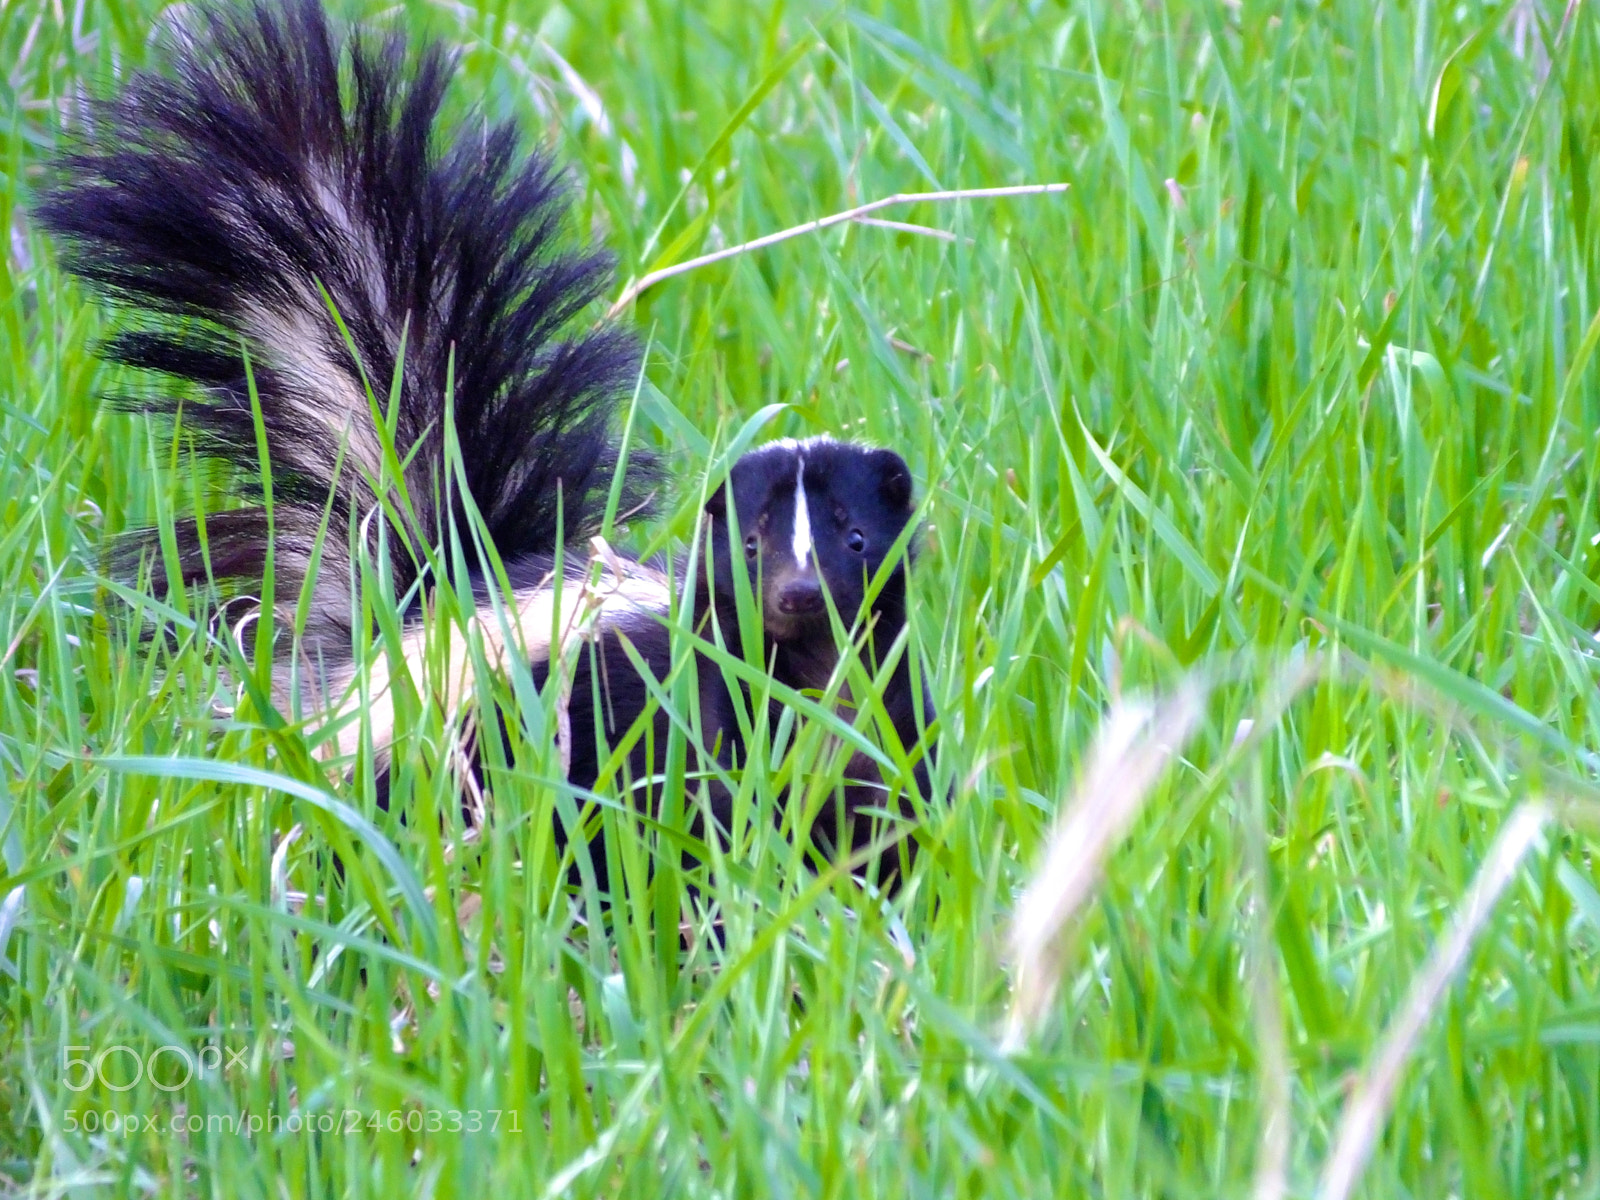 Fujifilm FinePix HS50 EXR sample photo. Little skunk sees me photography